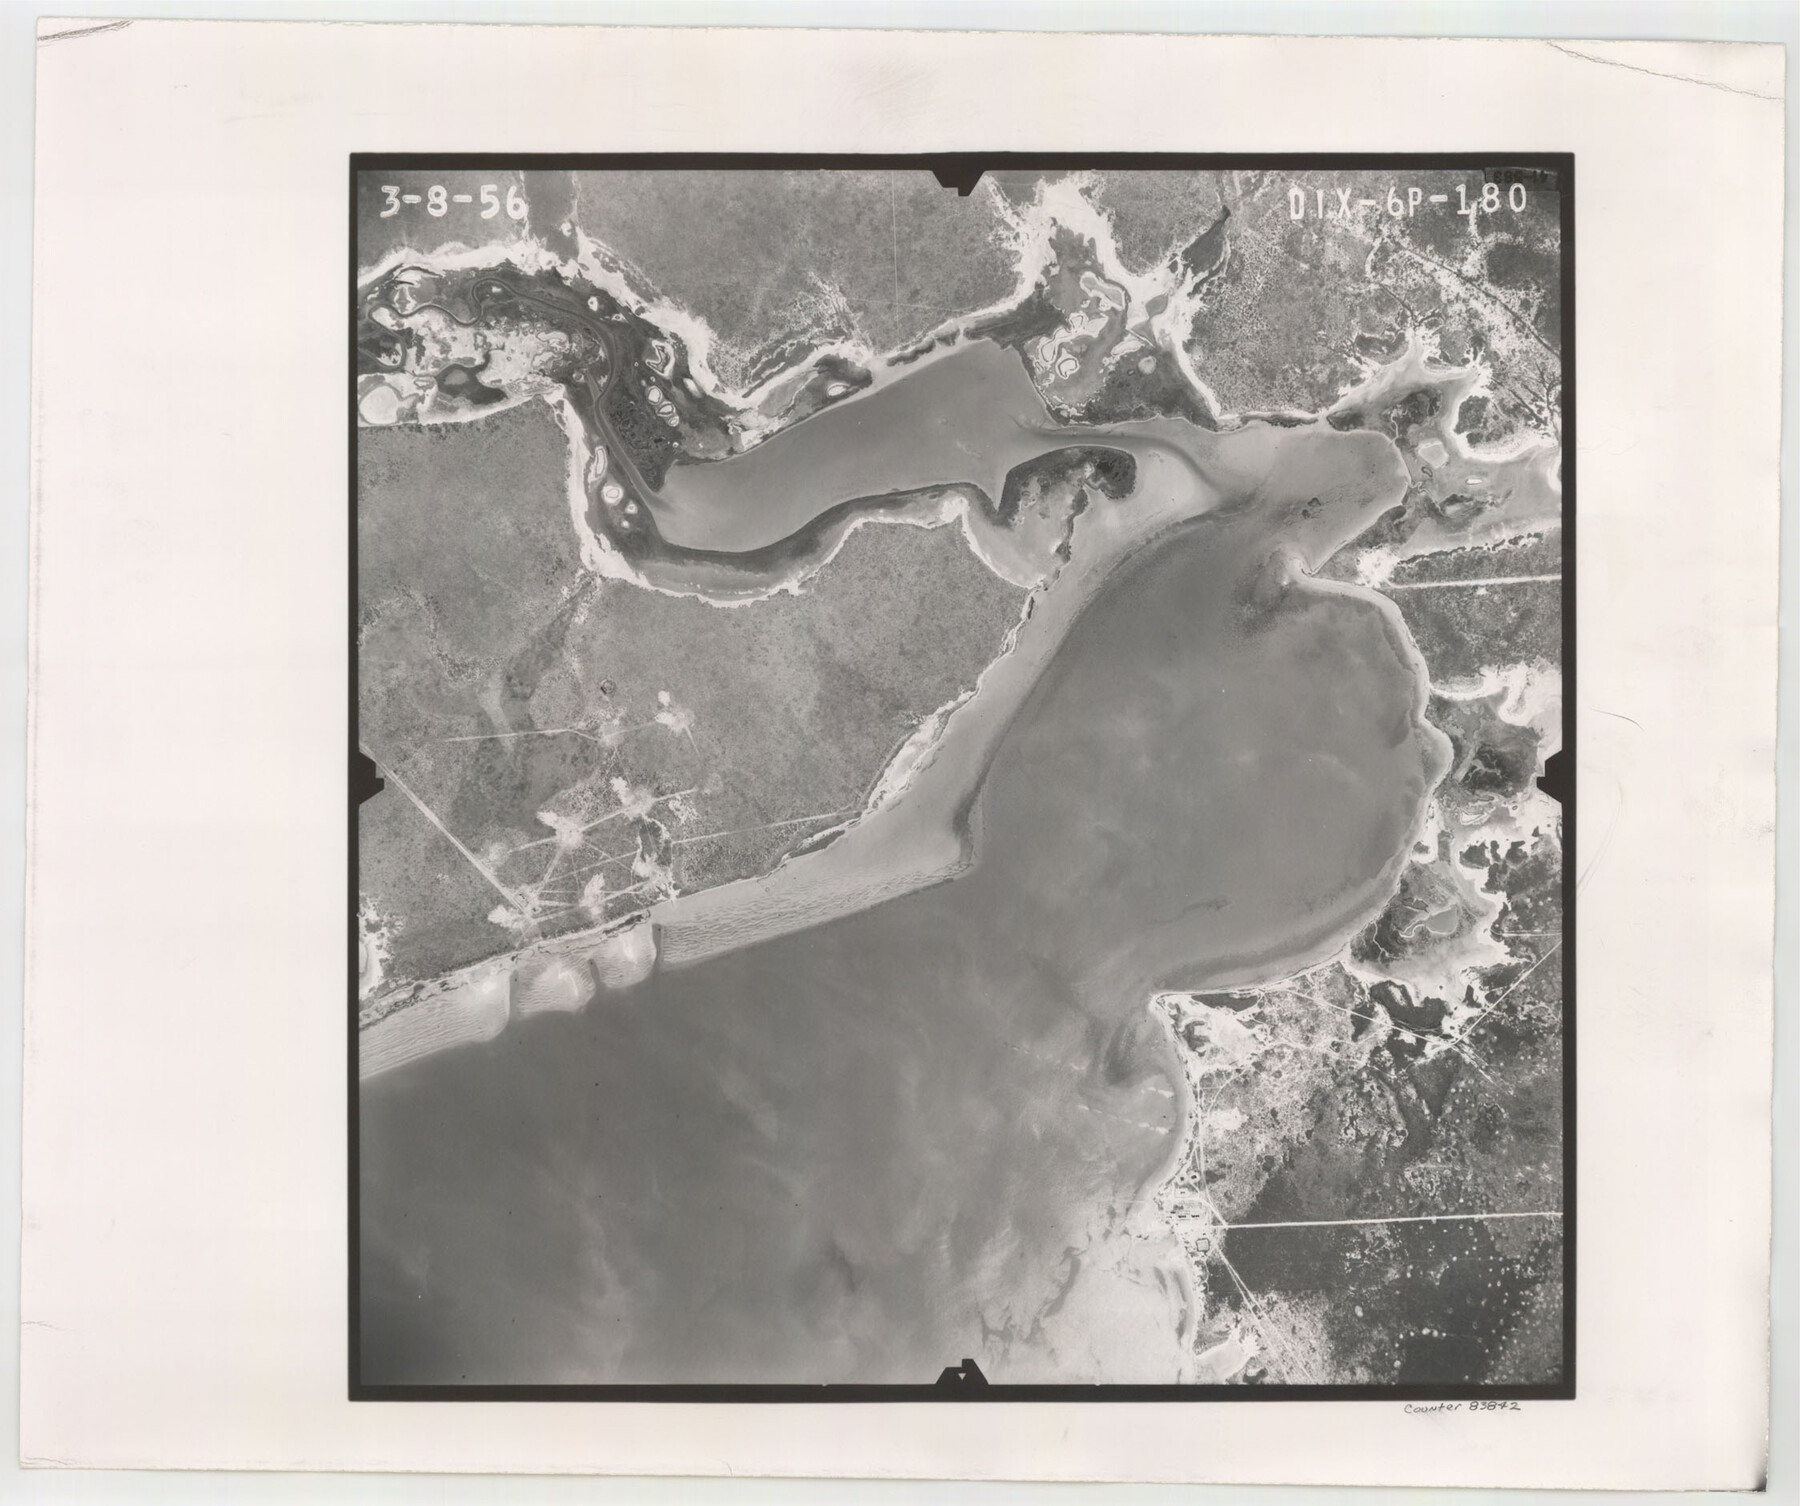 83842, Flight Mission No. DIX-6P, Frame 180, Aransas County, General Map Collection